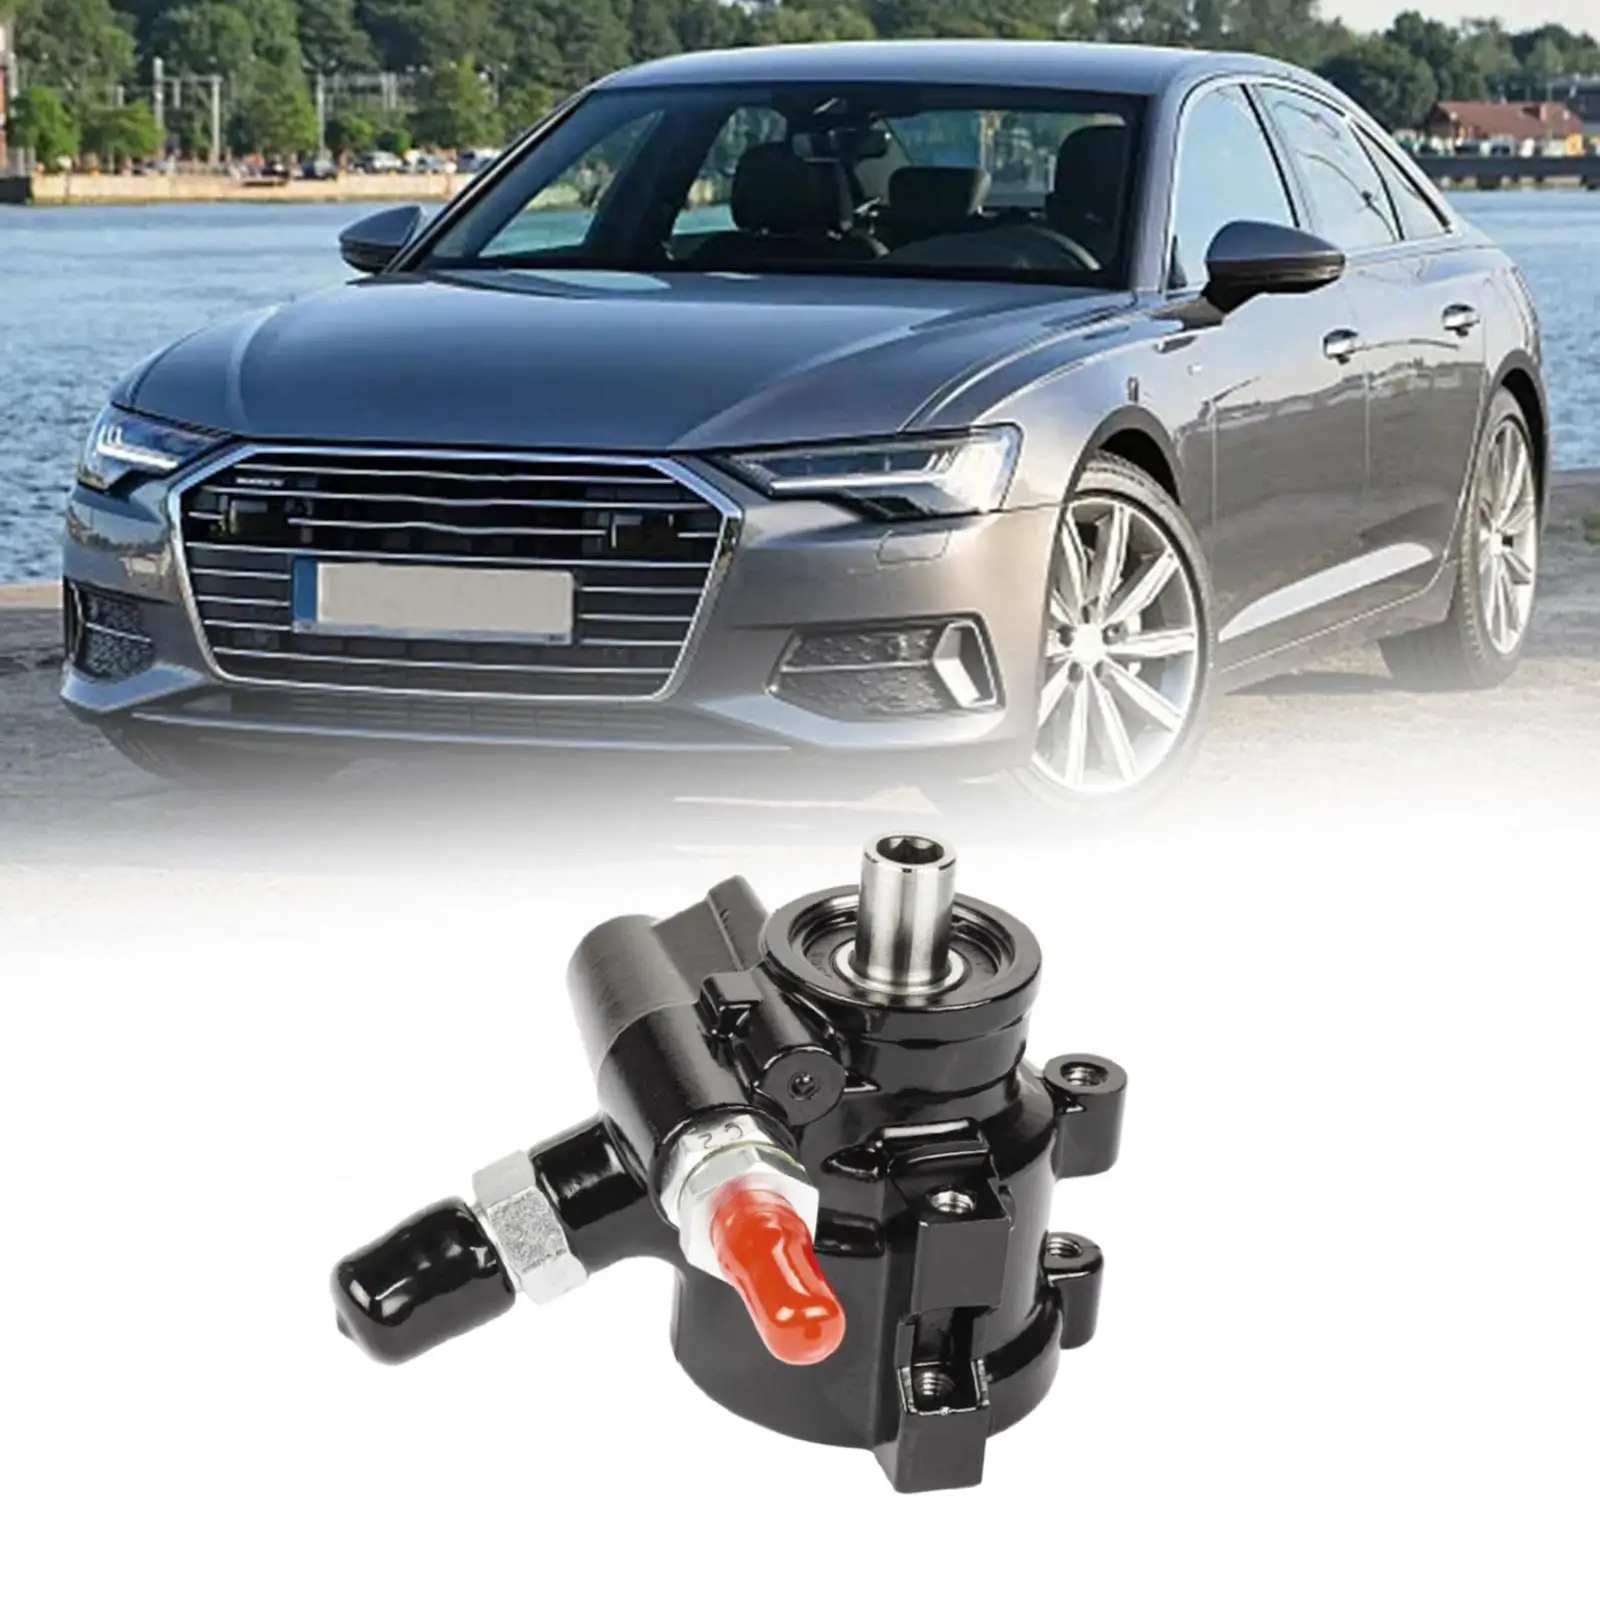 Power Steering Pump Car Accessories for Saginaw TC Type 2 Professional